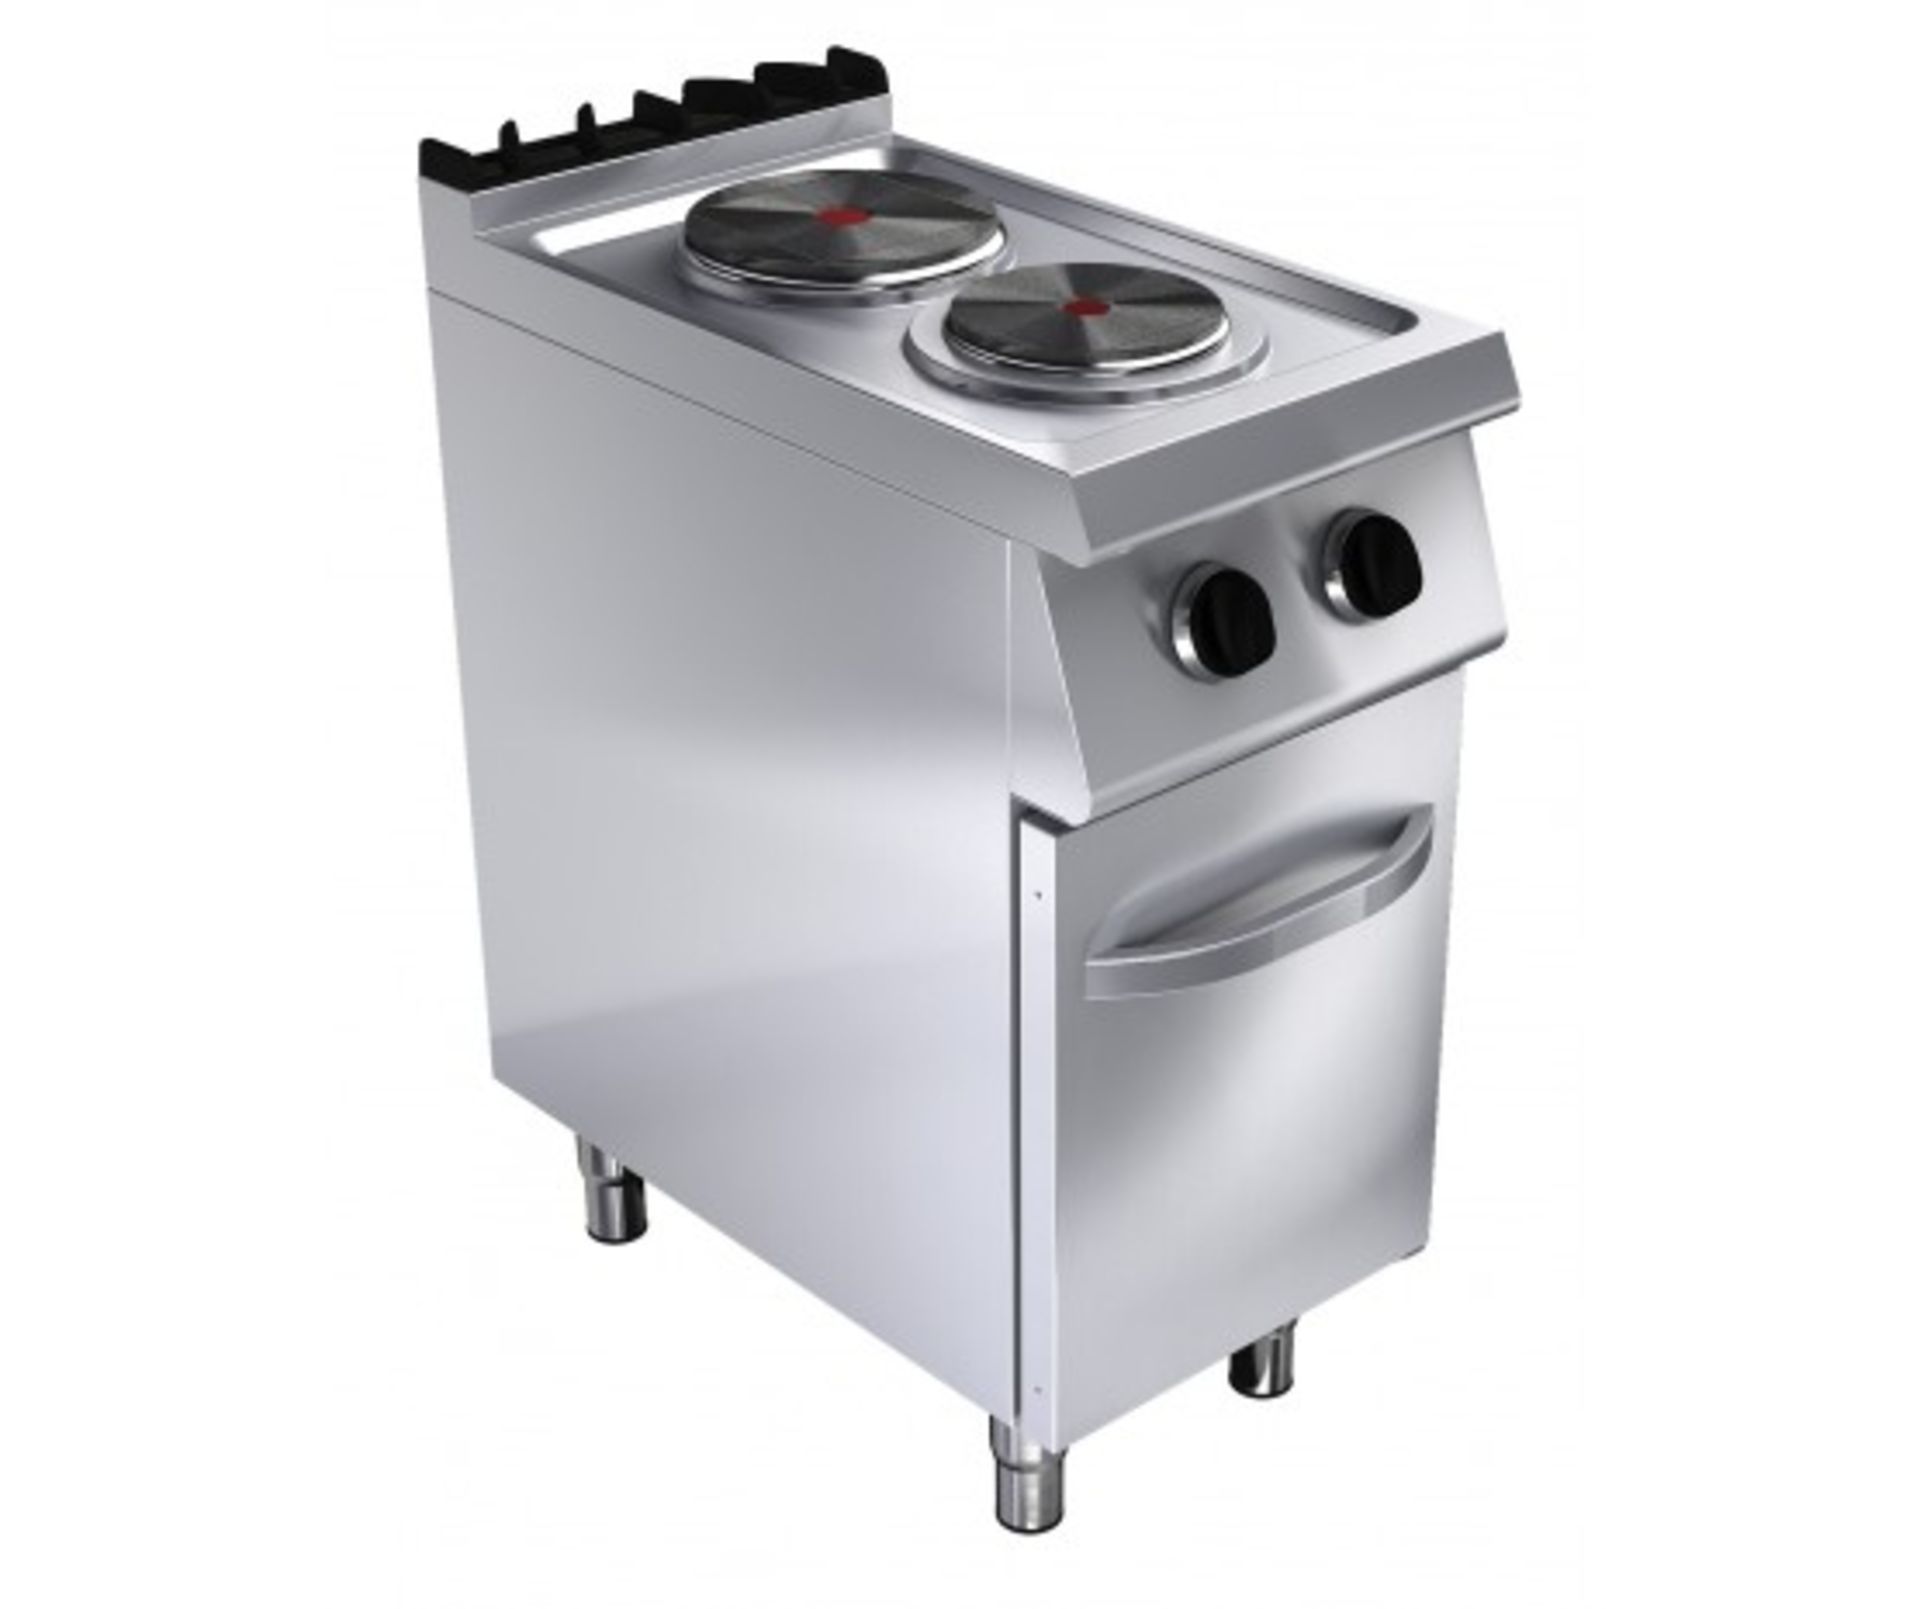 Boiling top 2 plates, cupboard - 3.5kW - 1phase - 400W x 730D x 900H - Electric - RG7K100